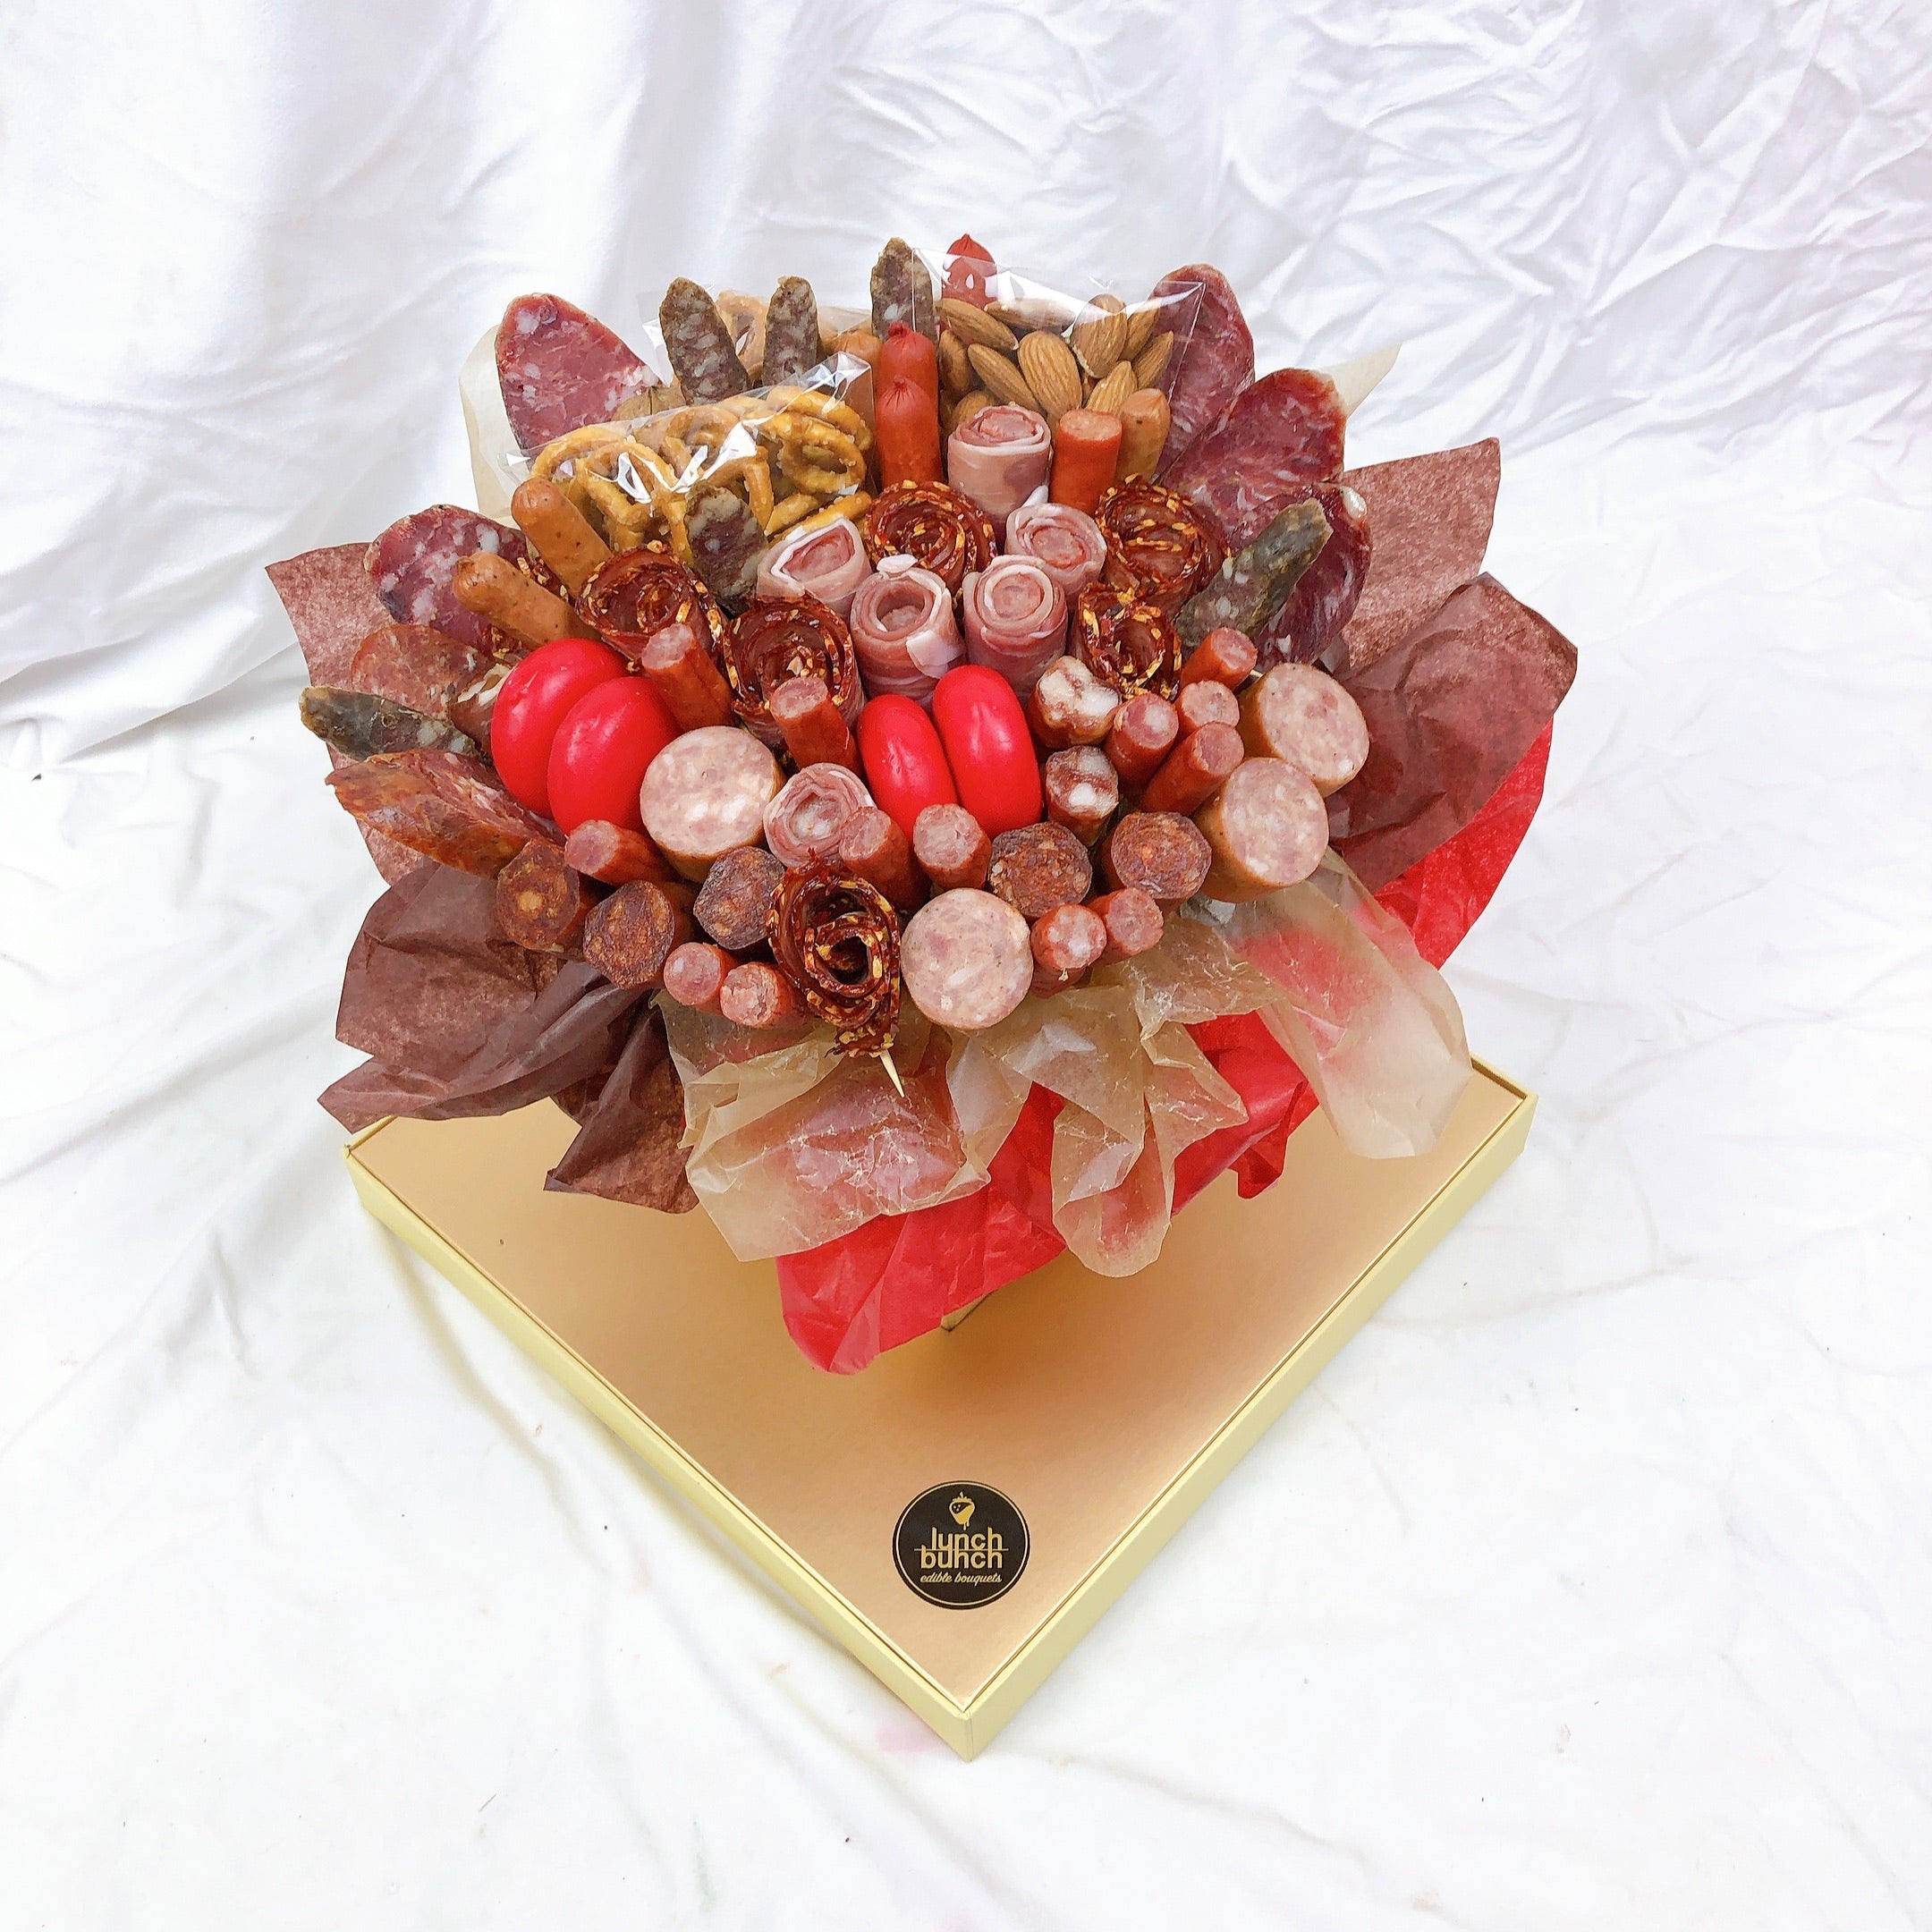 Prosciutto Roses Meat & Cheese Bouquet medium size Full of pork salami ham pretzels nuts Twiggy sticks cheese and walnuts savoury gift hamper online same day delivery